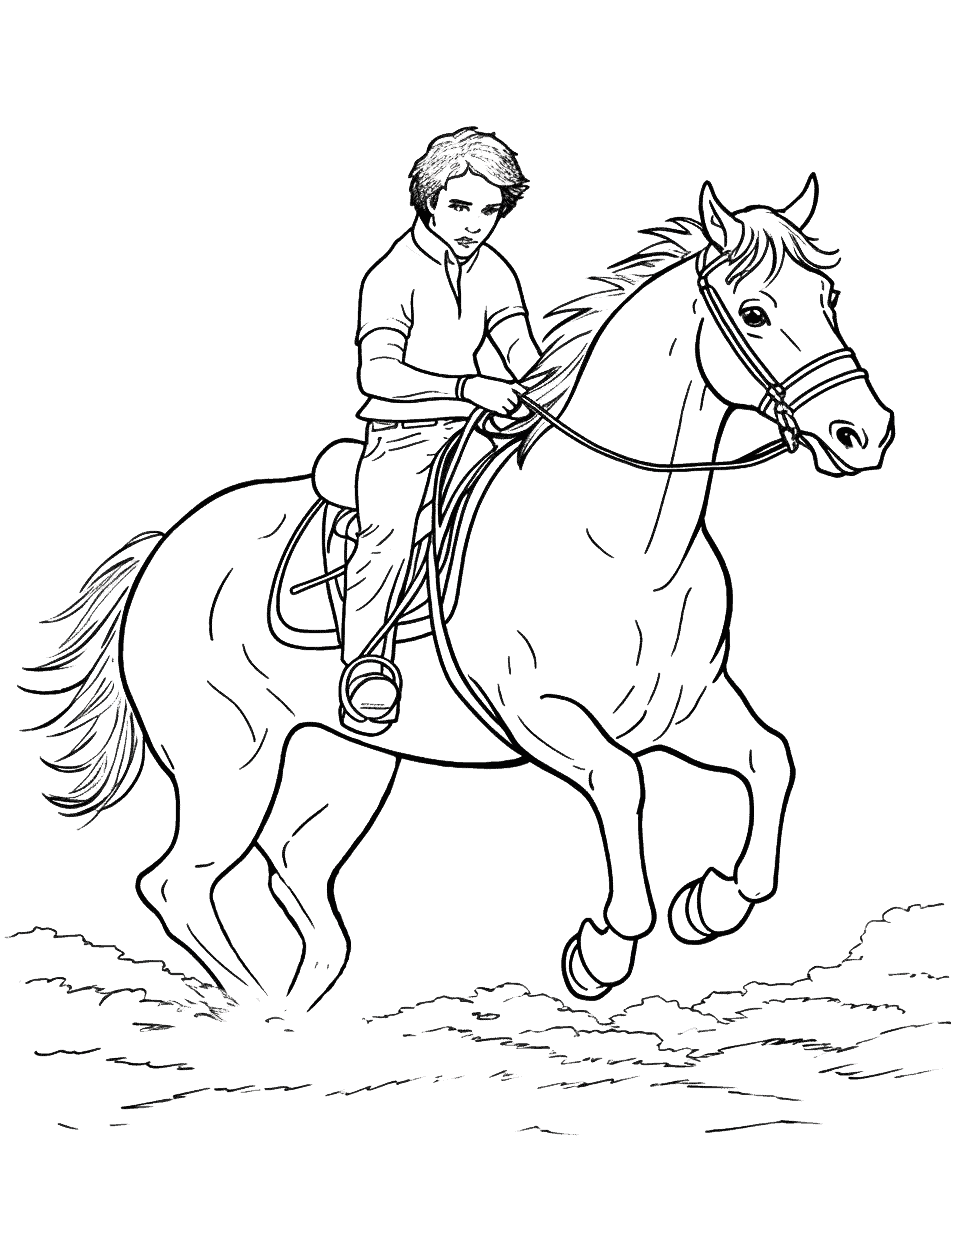 Rodeo Bull Riding Horse Coloring Page - A thrilling rodeo scene with a cowboy trying to stay on a bucking bronco.